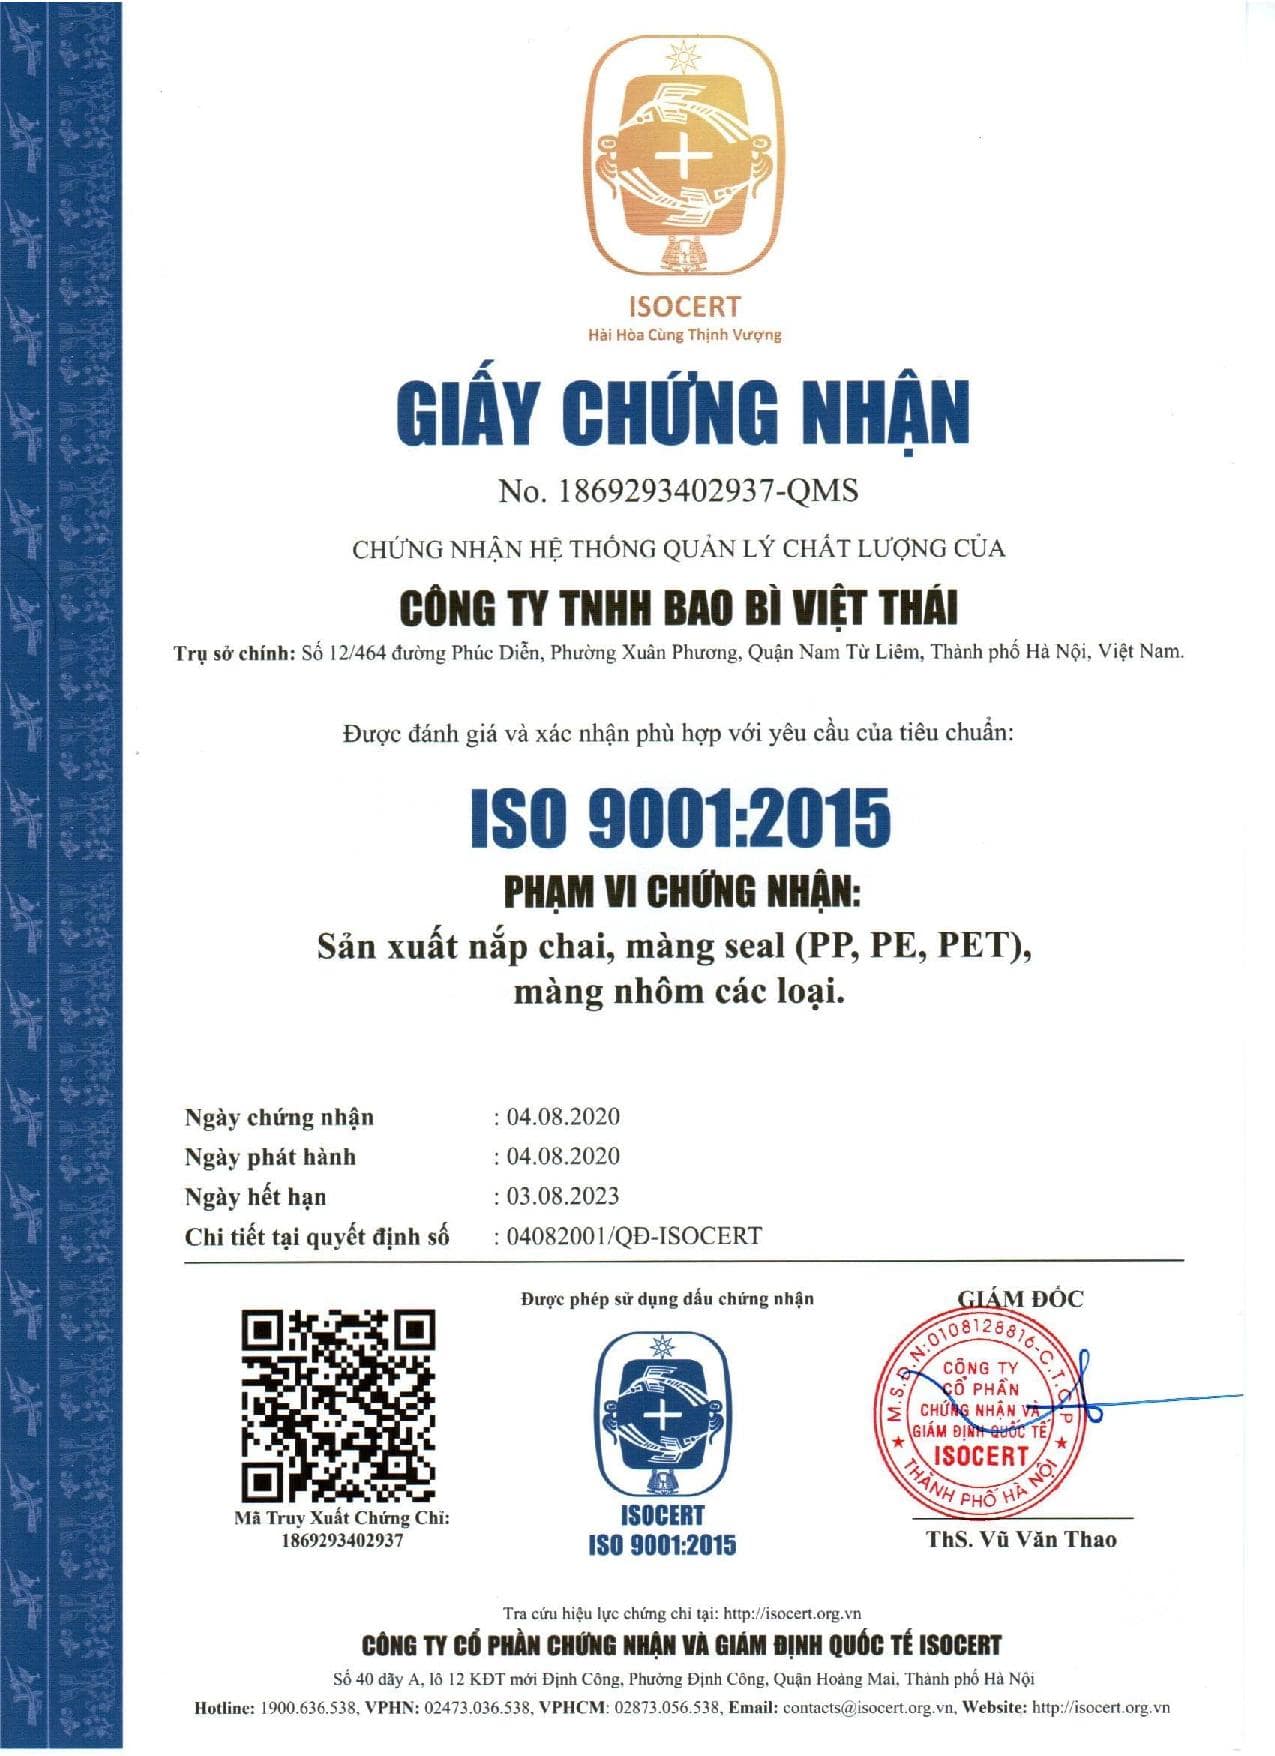 ISO Việt Thái